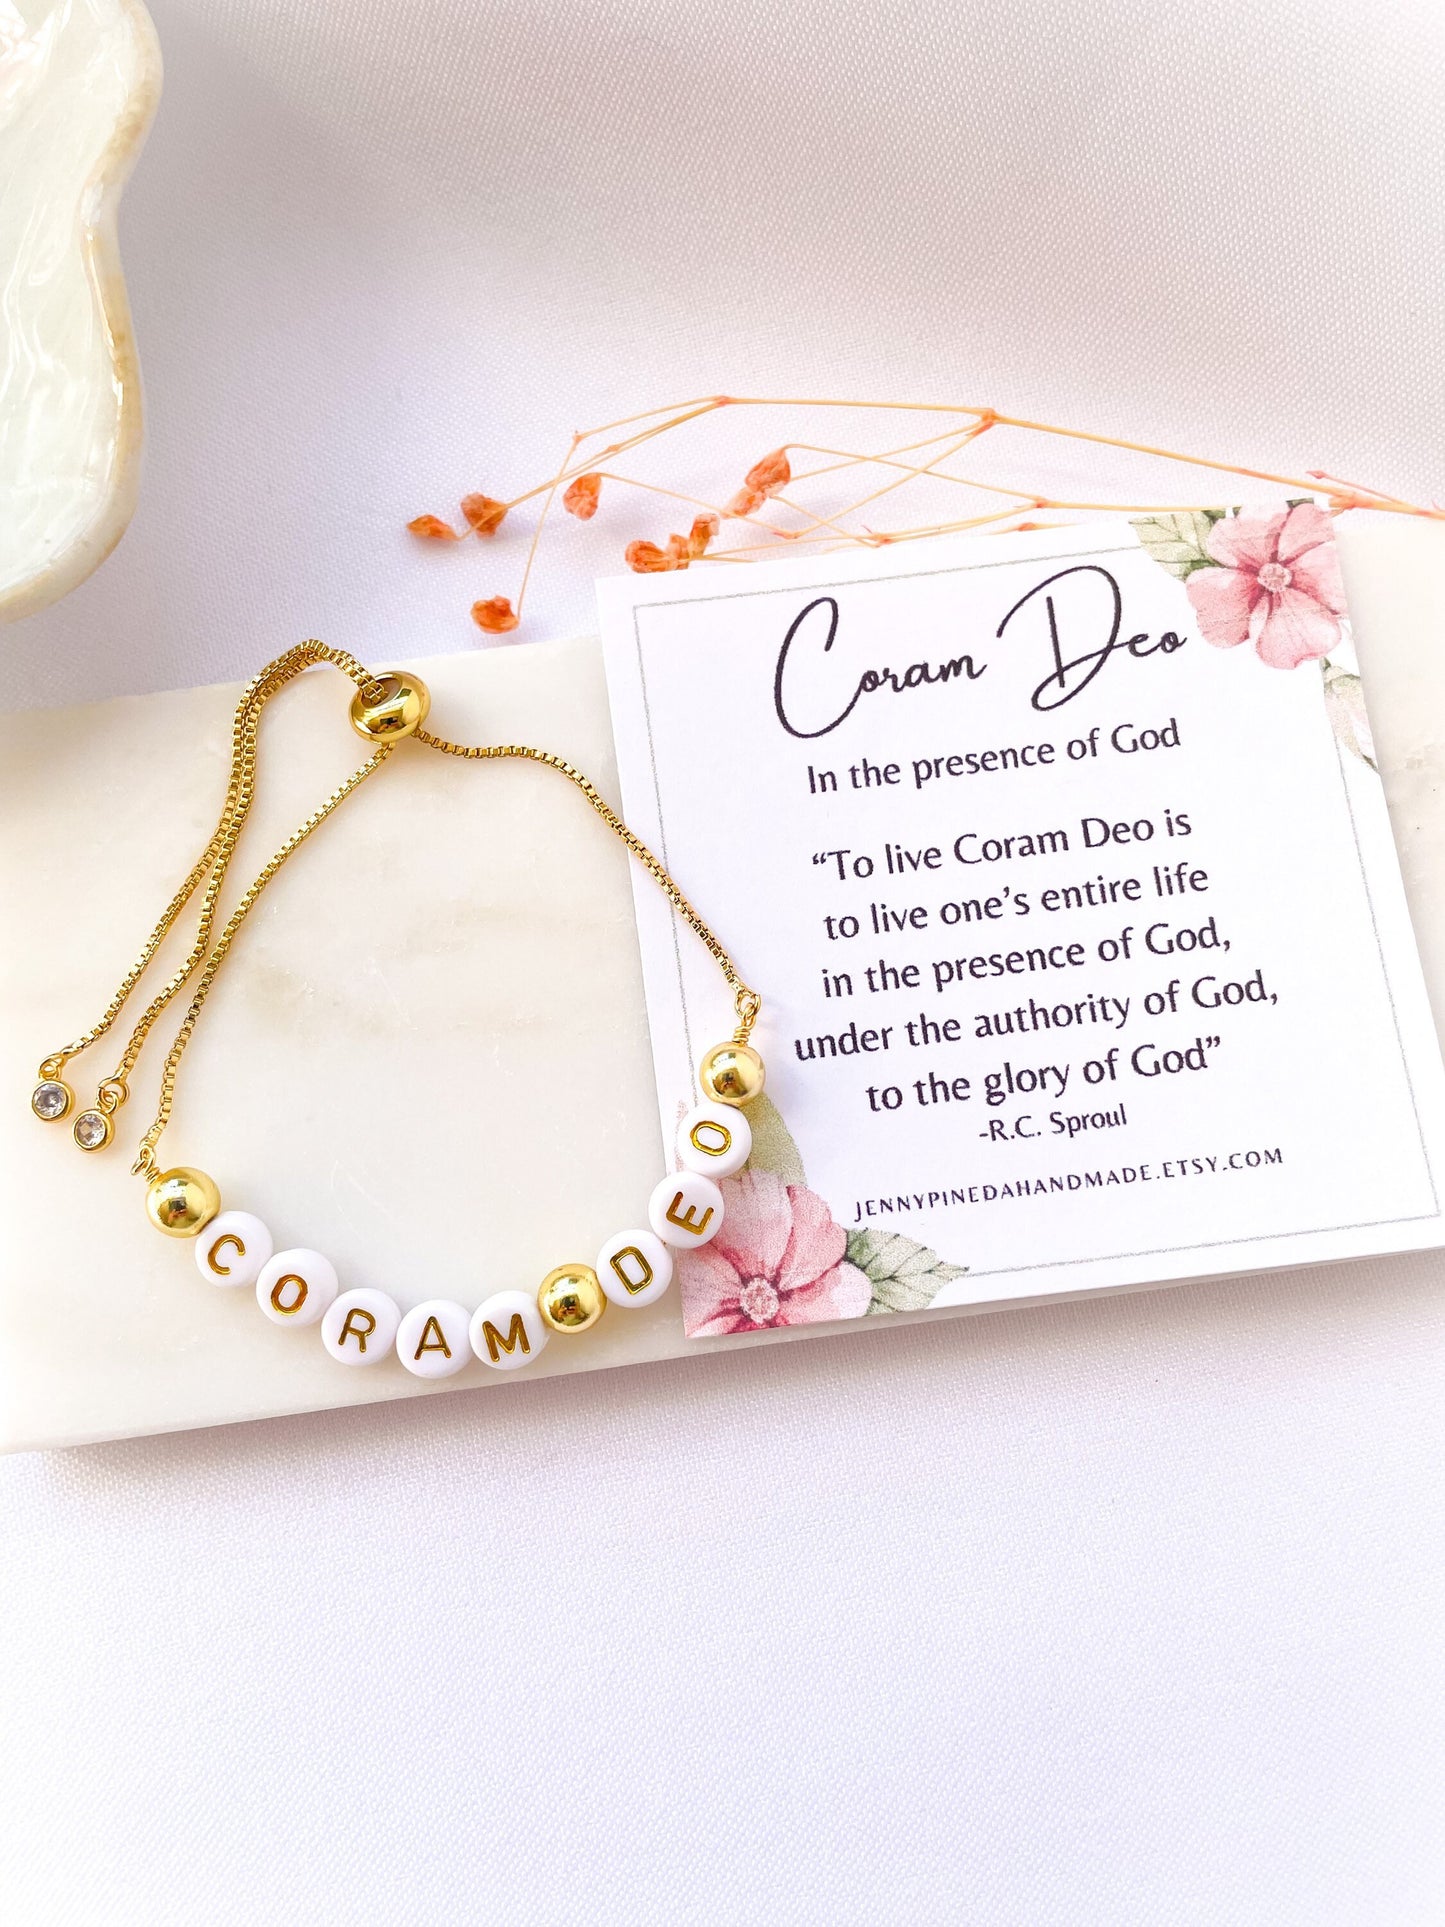 Coram Deo bracelet, 5 solas, reformed theology, soli deo gloria, christian birthday gift, reformed wife gift, latin, rc sproul, bible verse